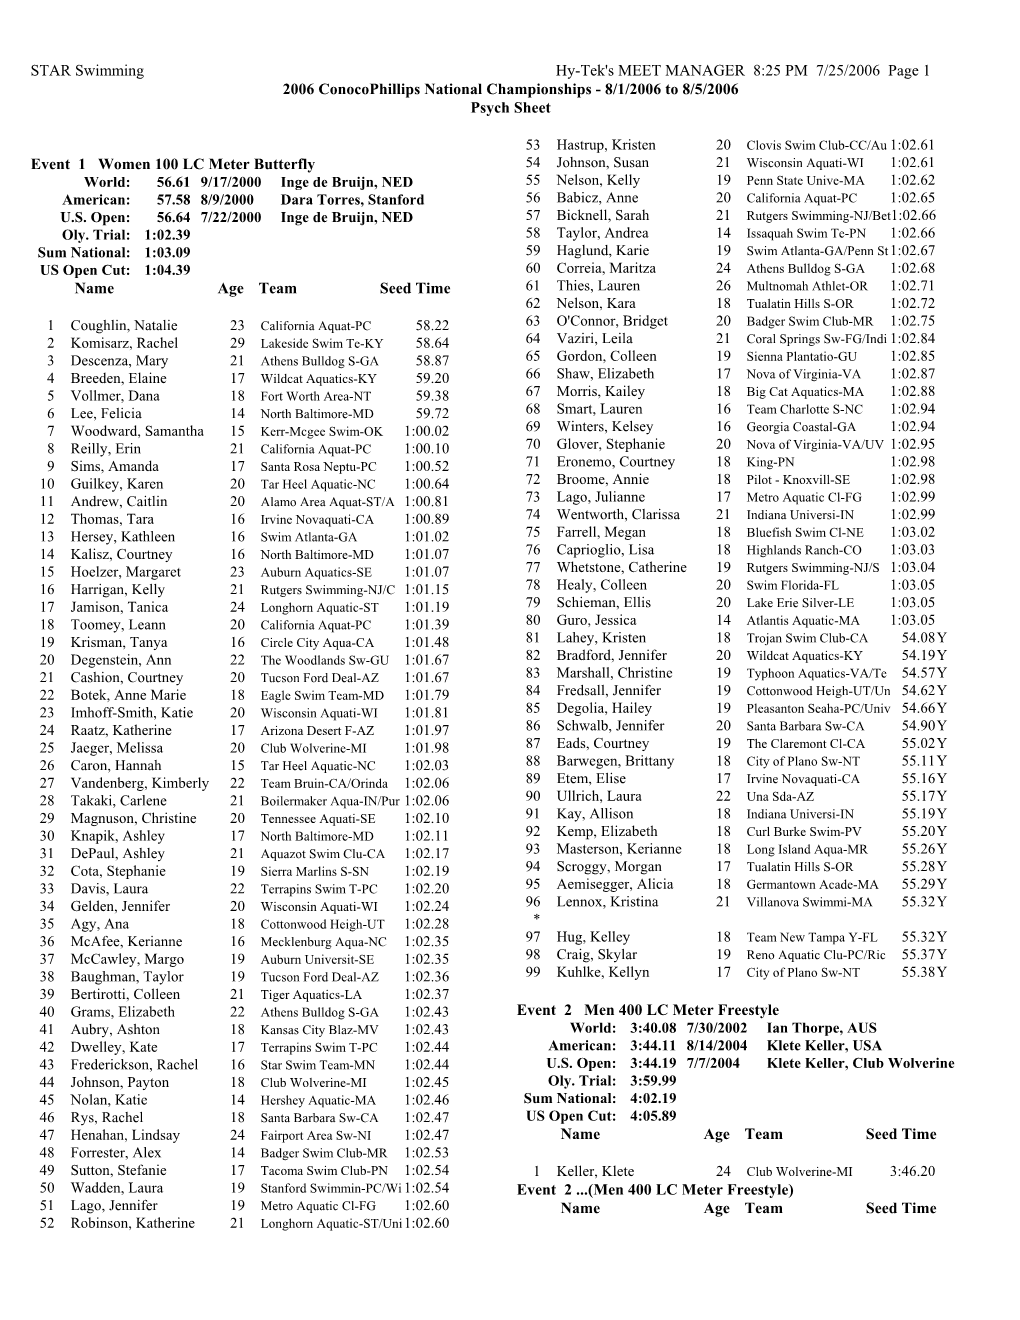 STAR Swimming Hy-Tek's MEET MANAGER 8:25 PM 7/25/2006 Page 1 2006 Conocophillips National Championships - 8/1/2006 to 8/5/2006 Psych Sheet